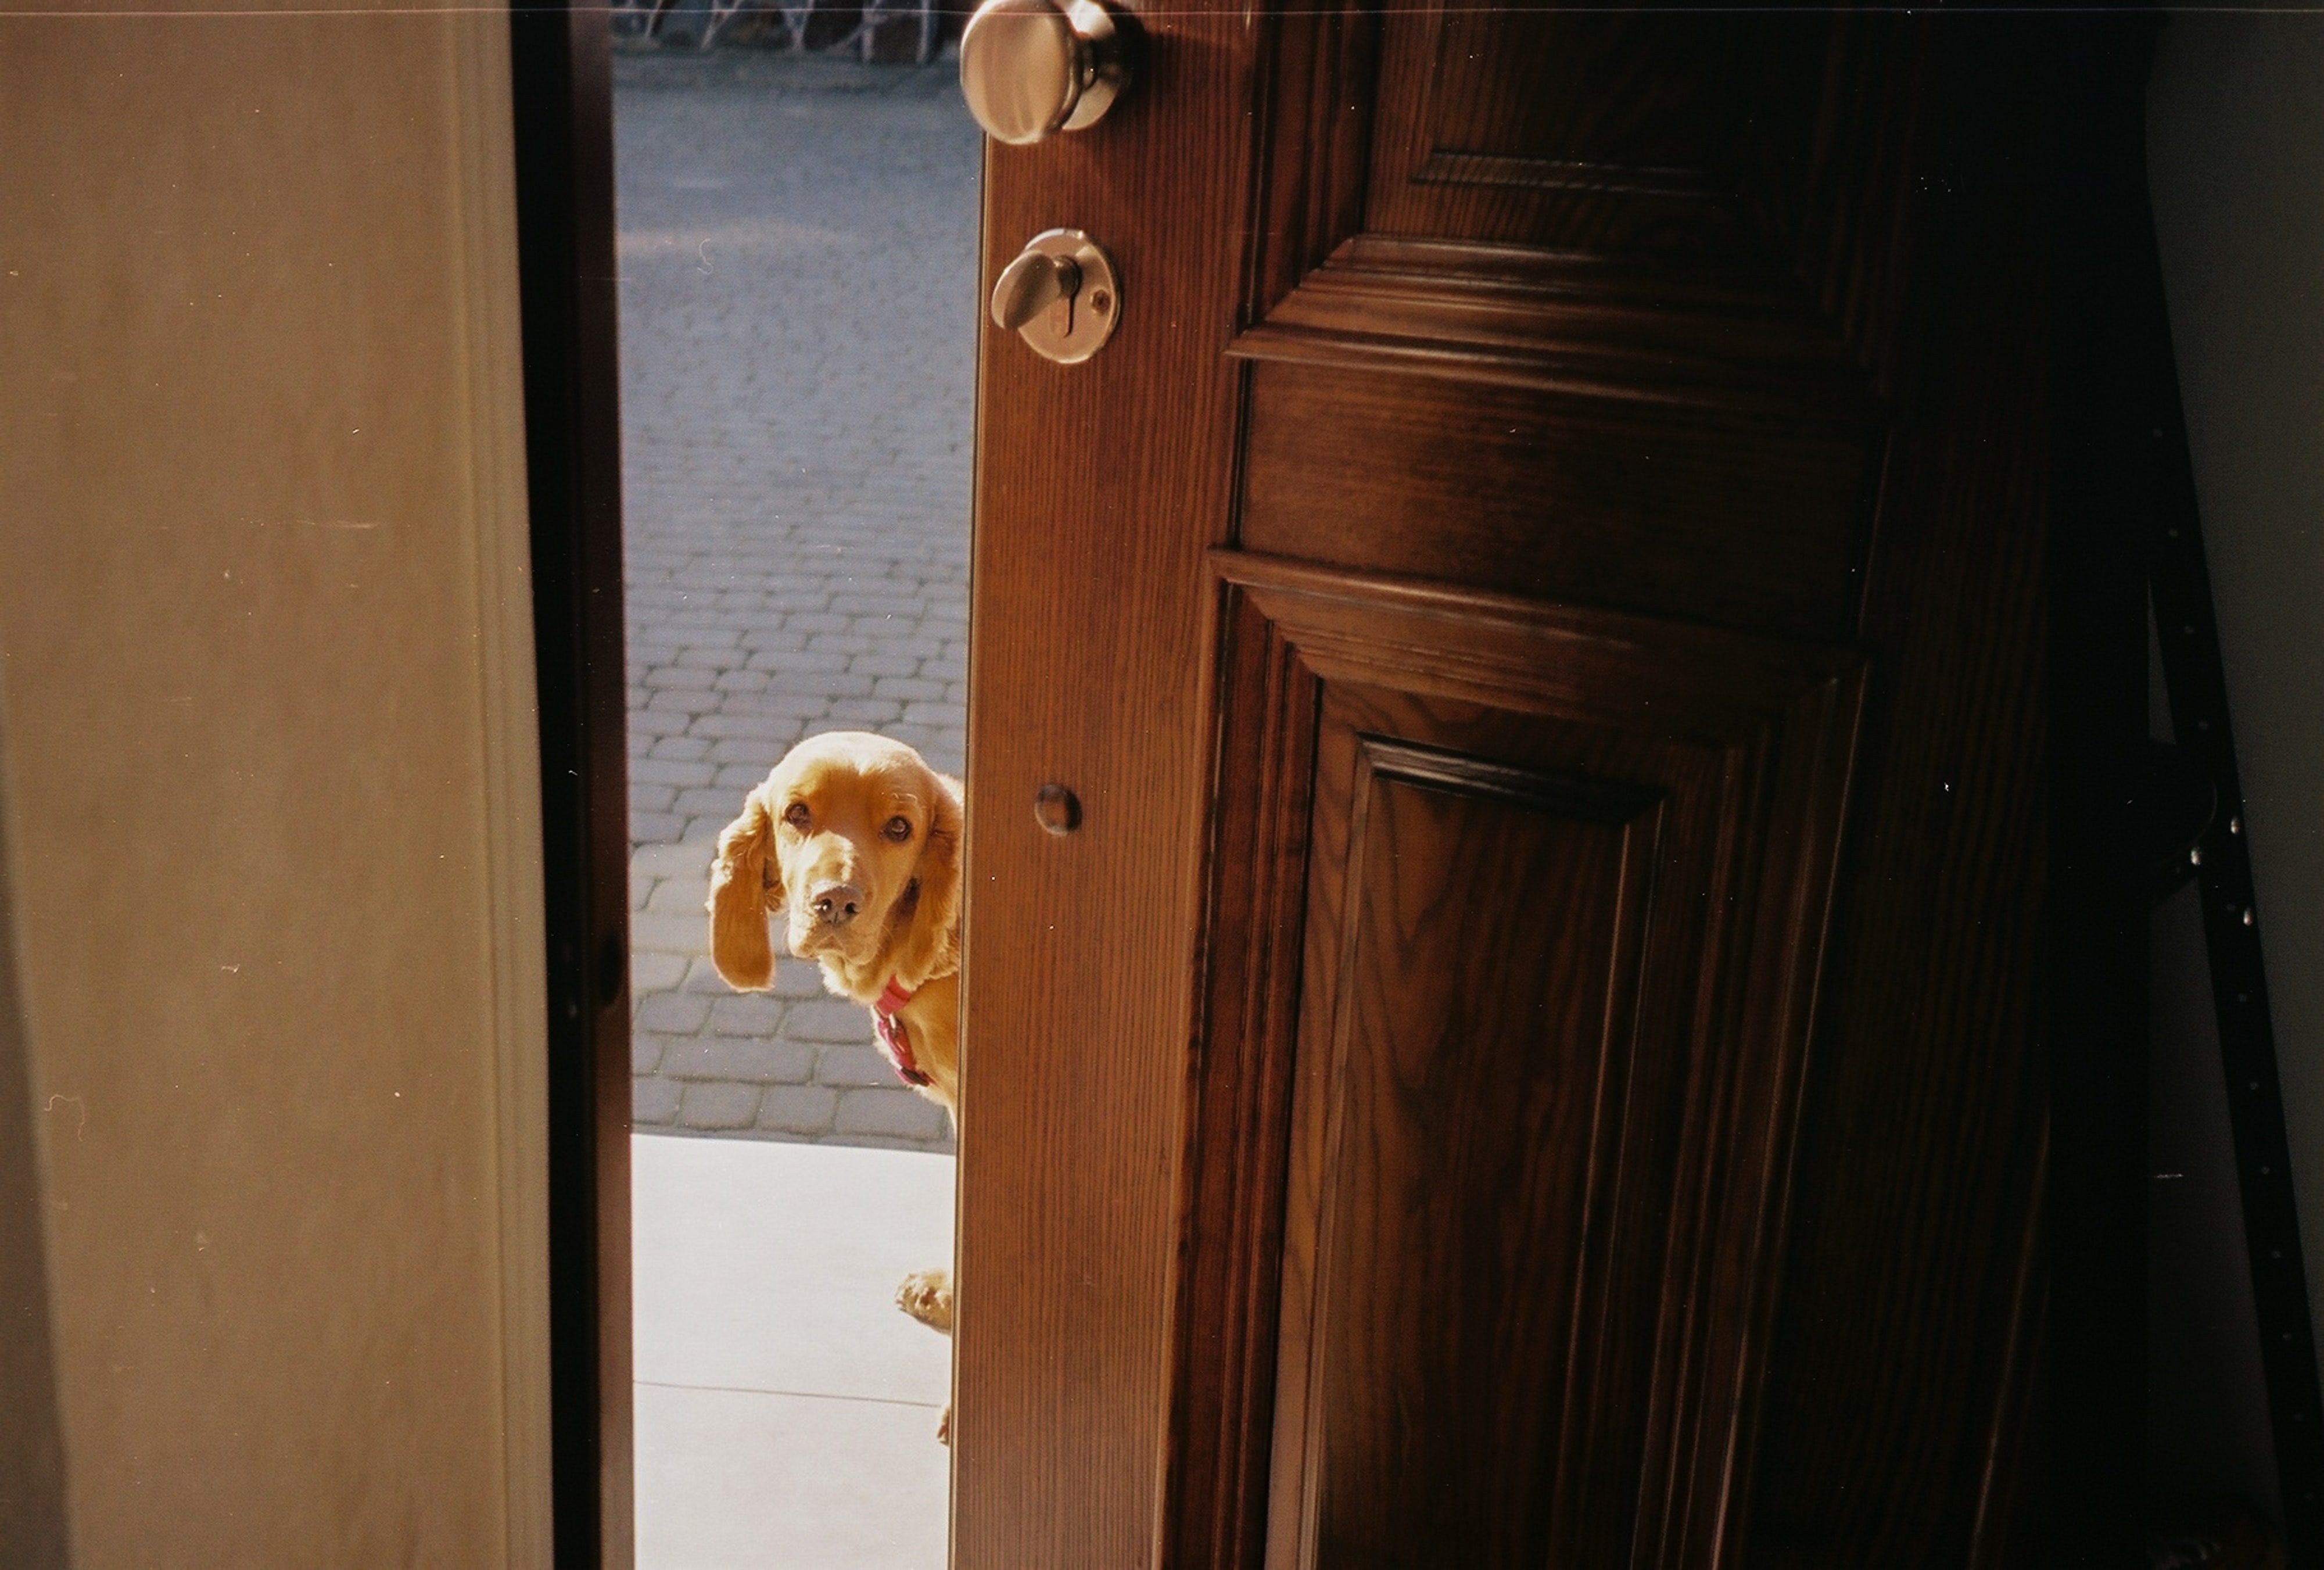 A person reminisced about leaving their front door open for their dog. | Source: Unsplash